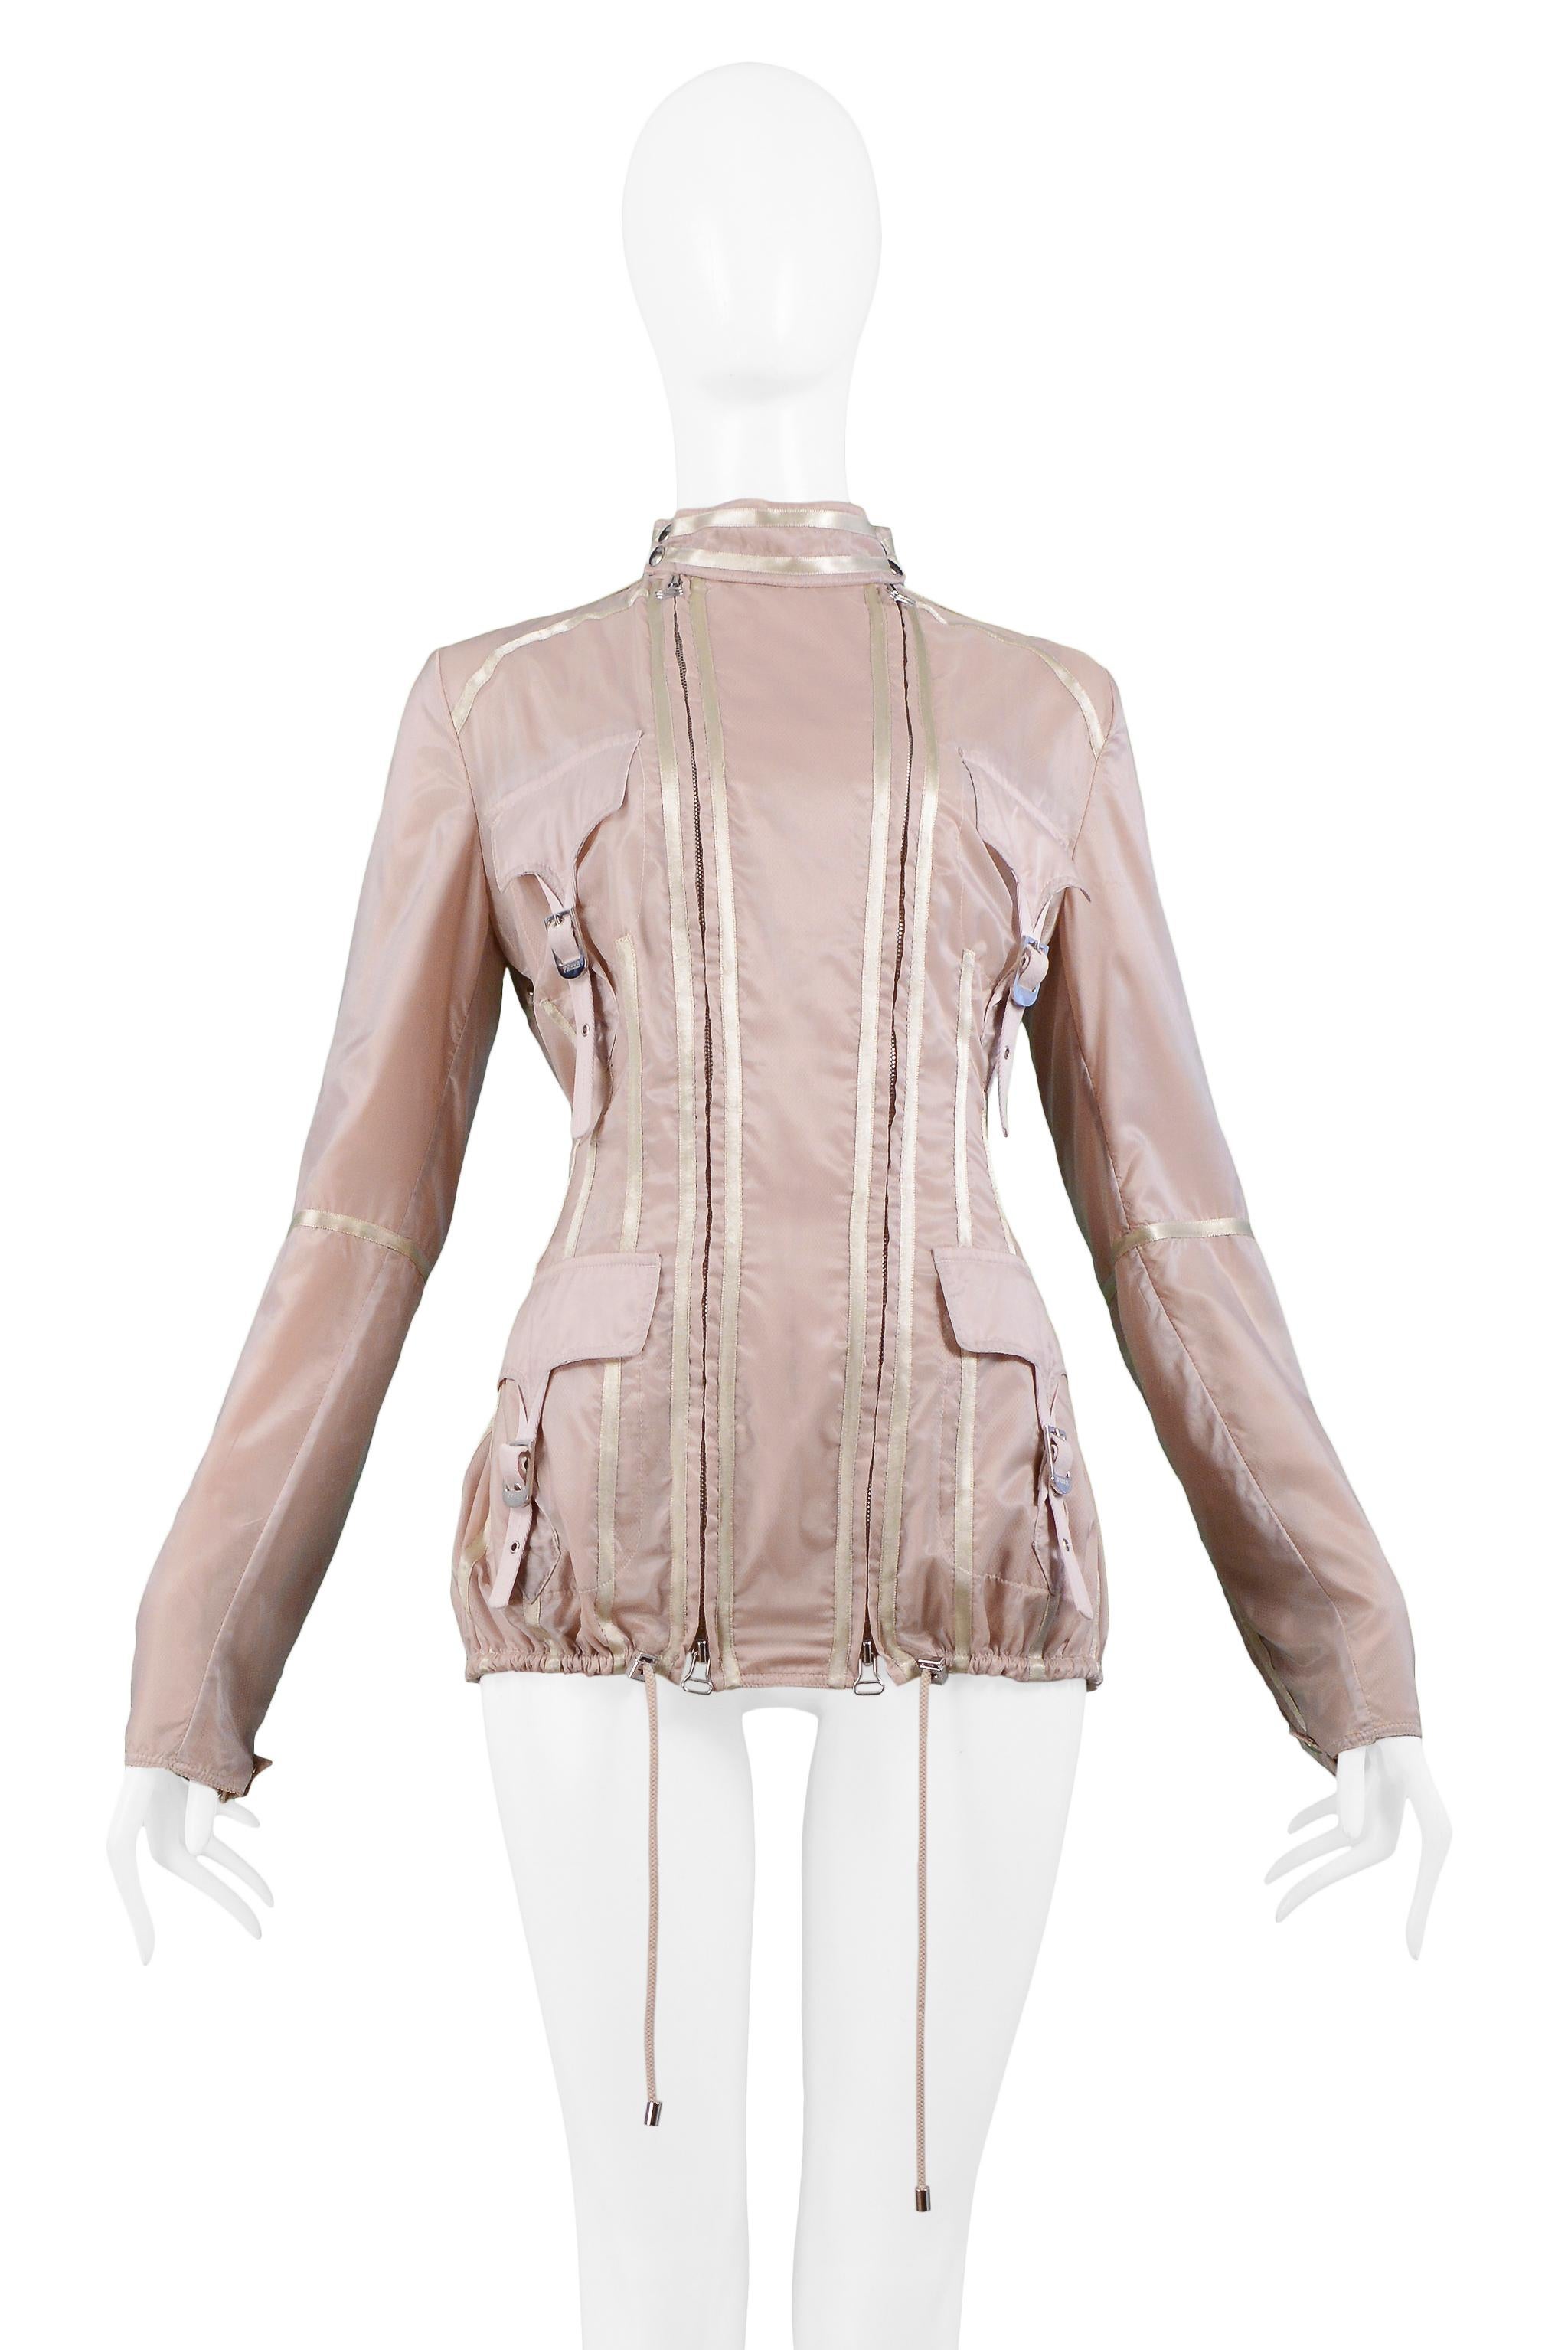 Resurrection Vintage is excited to offer a vintage Gianfranco Ferre blush pink nylon windbreaker jacket featuring double zippers at front, four flap pockets with buckle closures, zippers at sleeves with inset mesh panels, and drawstring at hem.